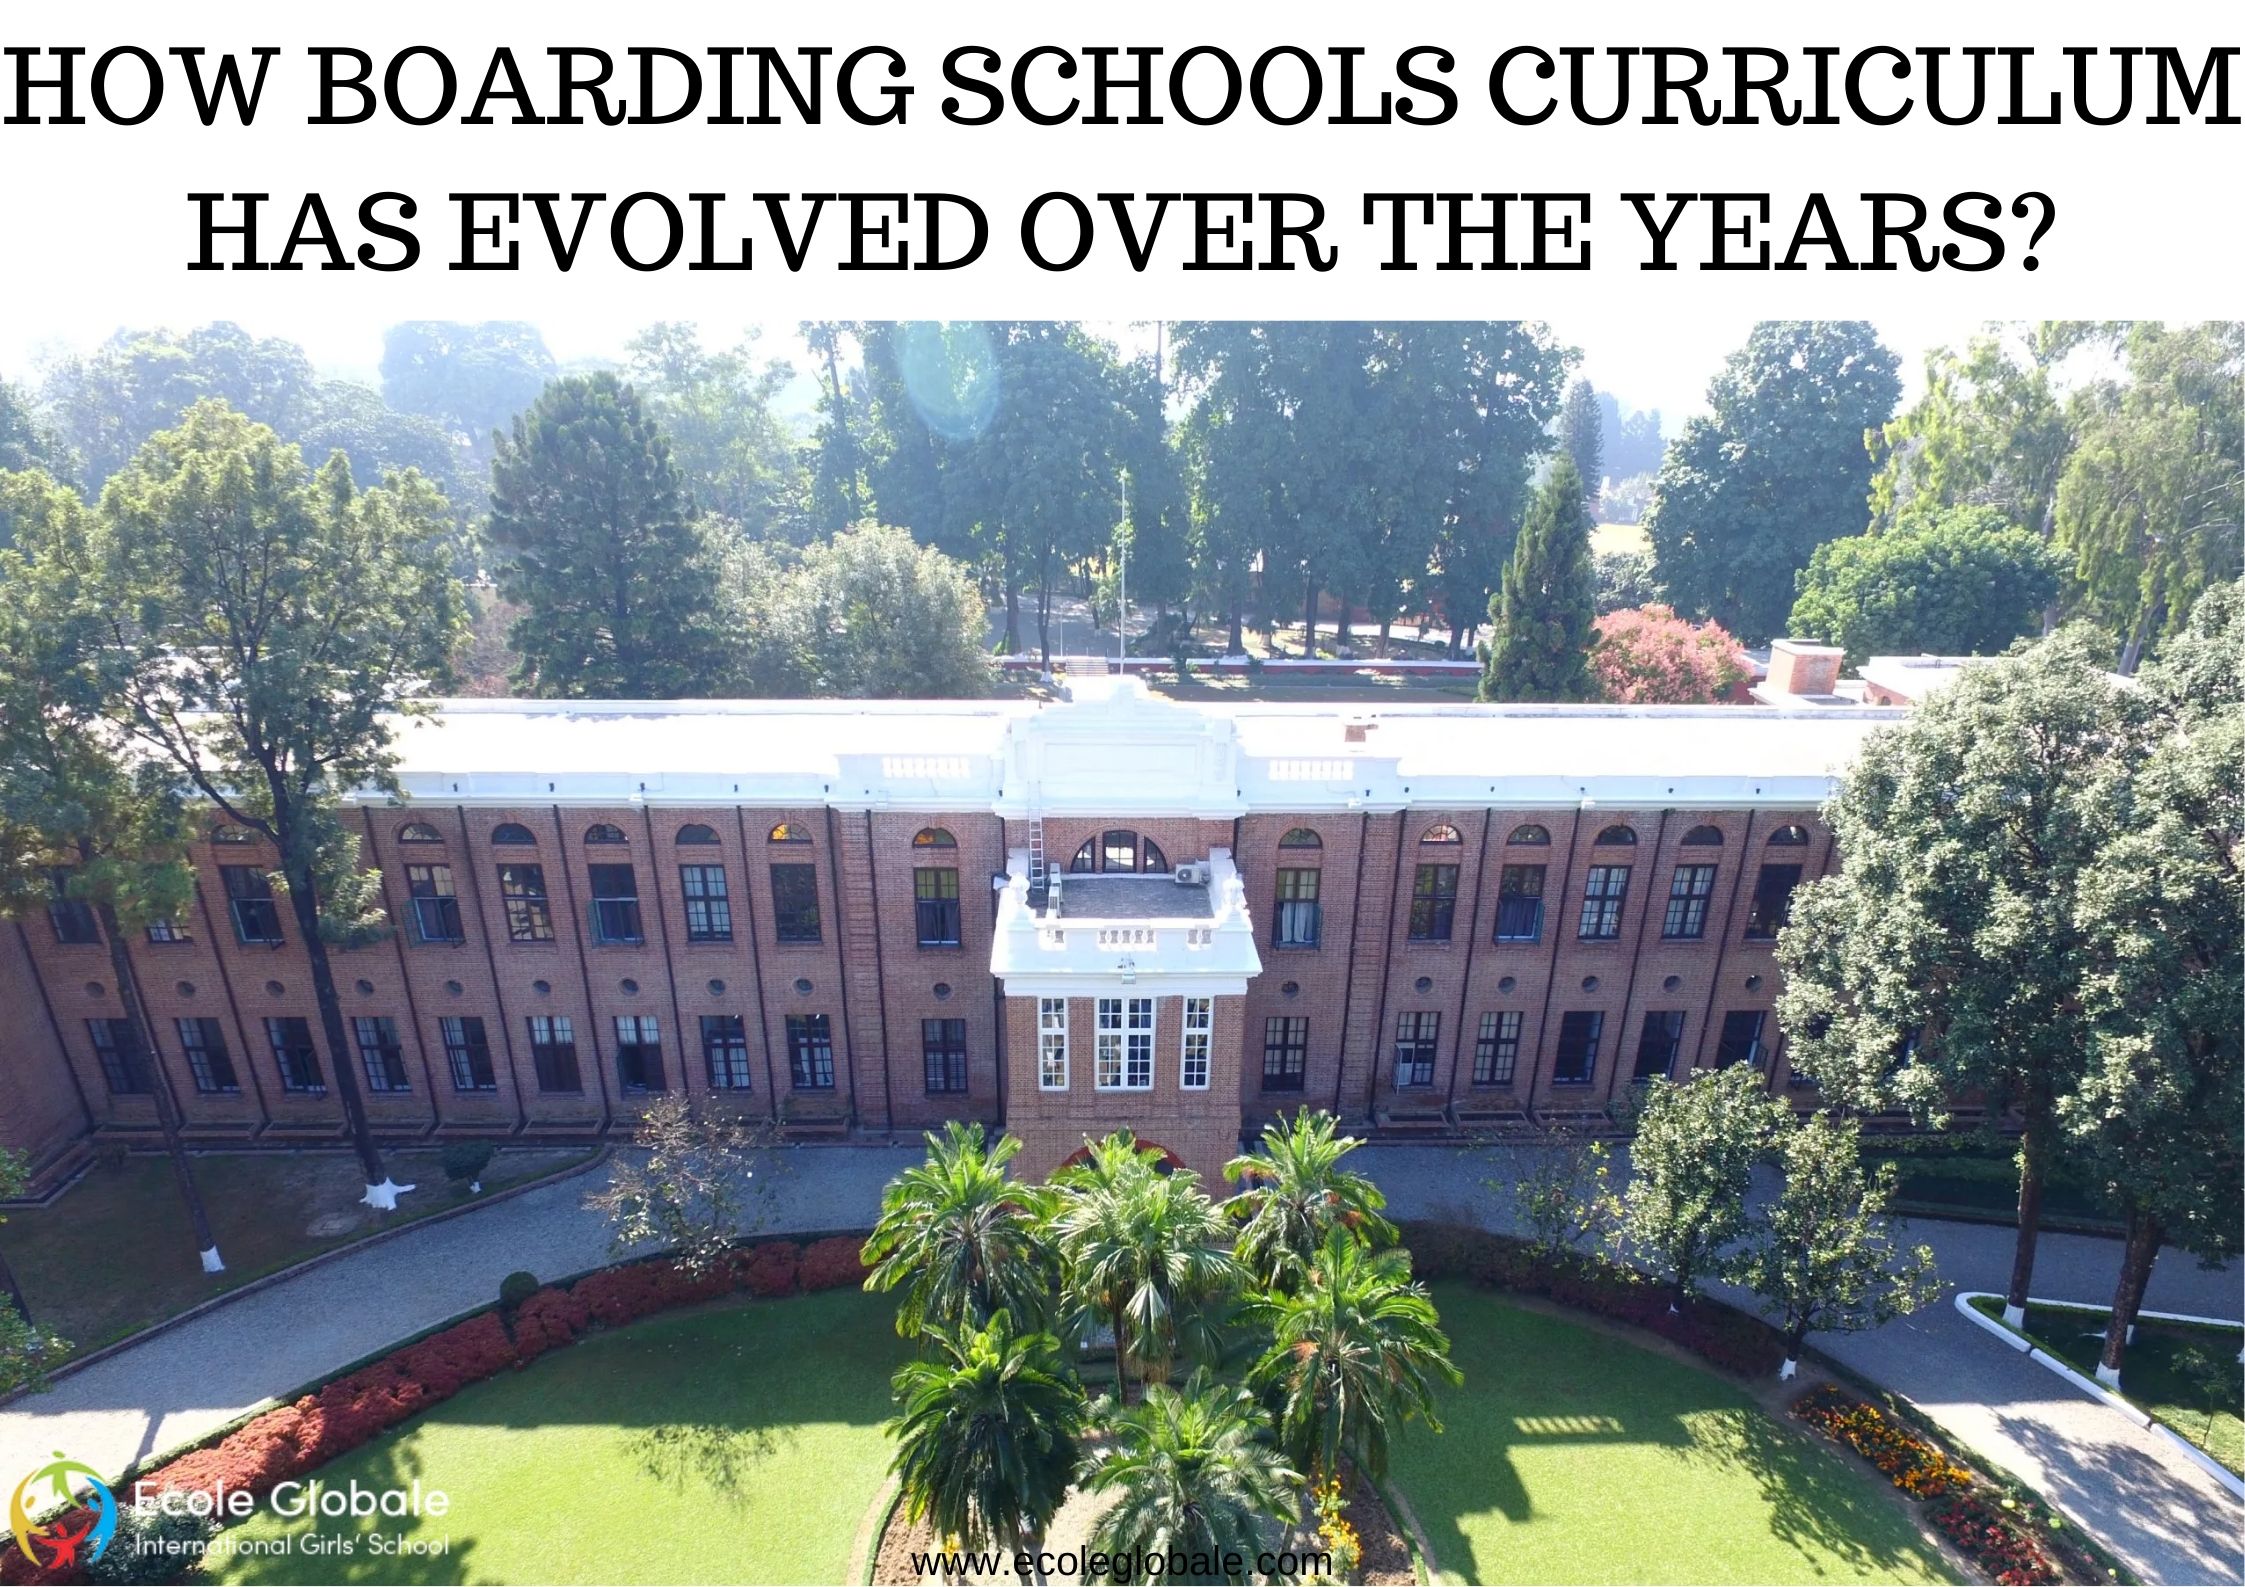 HOW BOARDING SCHOOLS CURRICULUM HAS EVOLVED OVER THE YEARS?